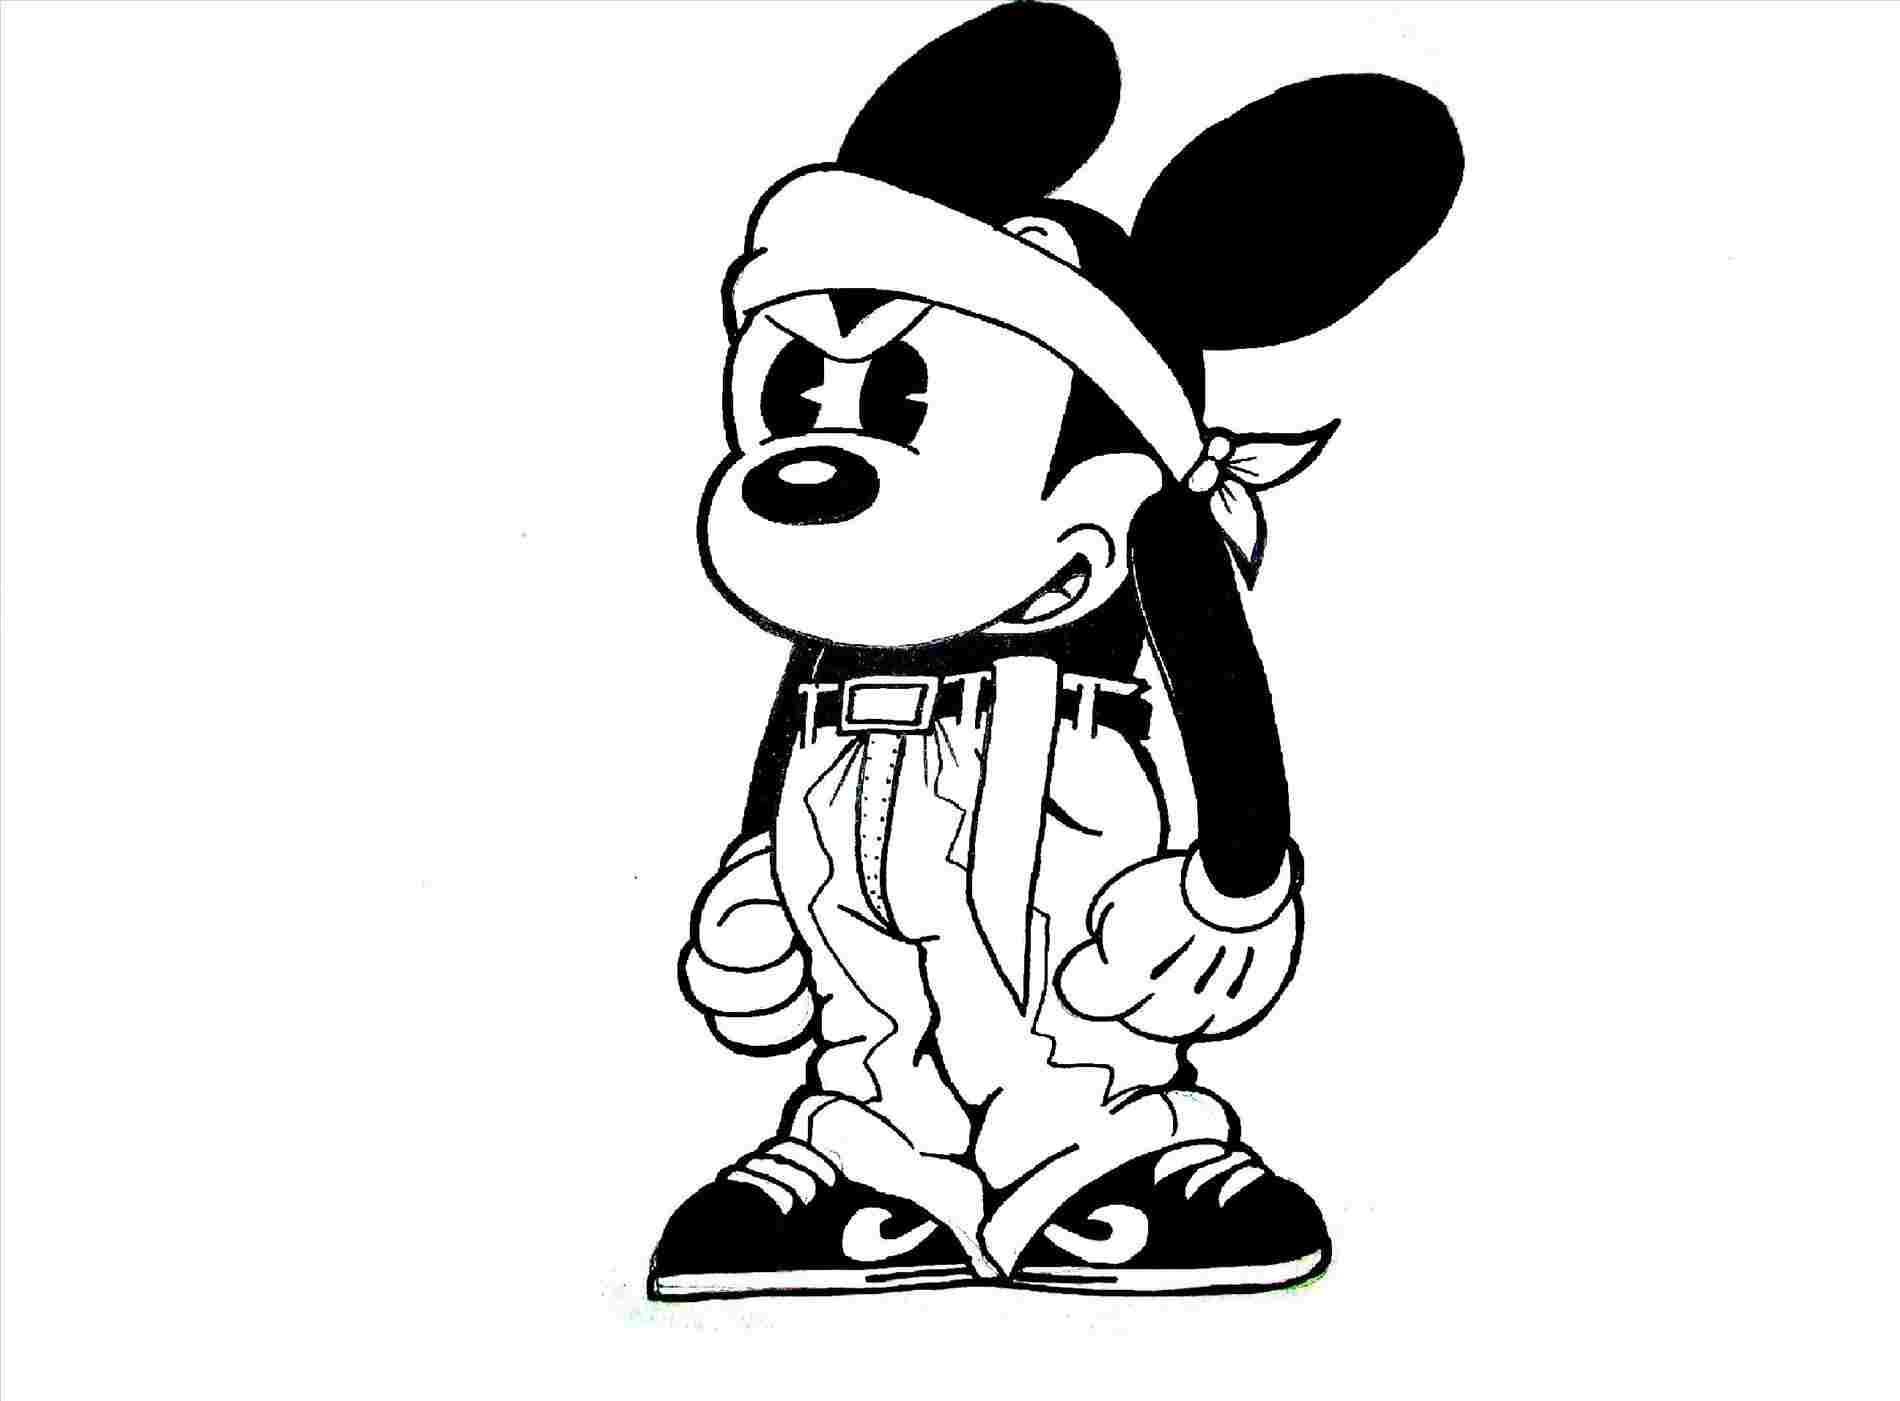 Gangster mickey mouse.